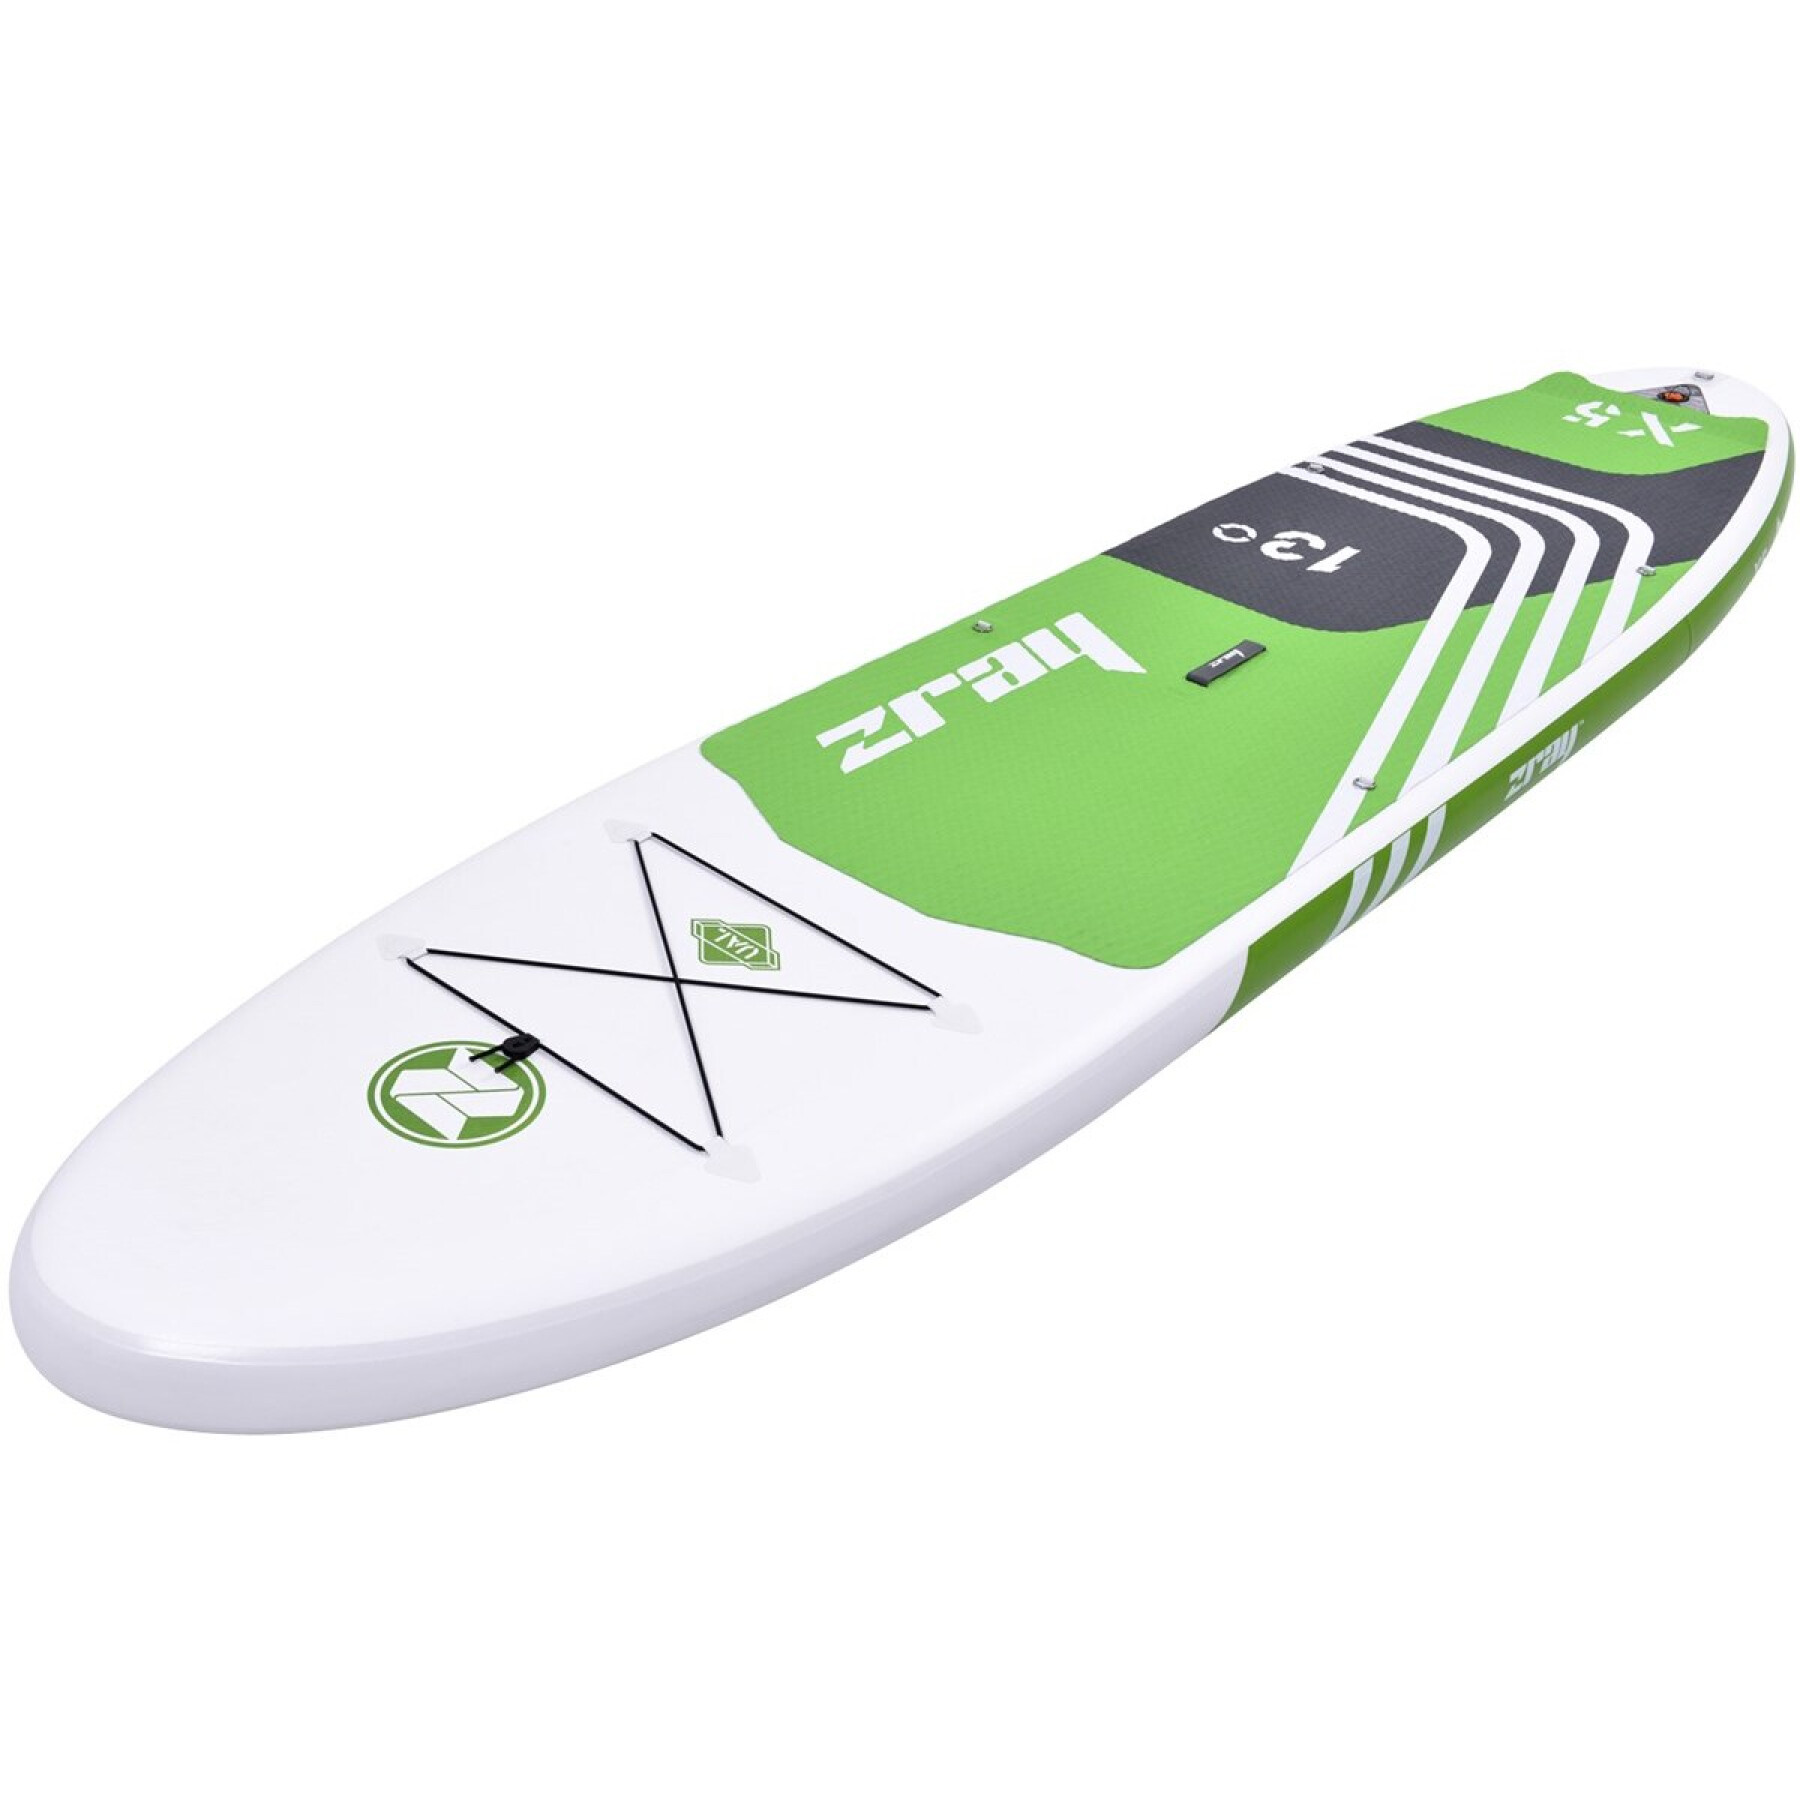 Inflatable stand-up paddle Zray X-Rider X5 13